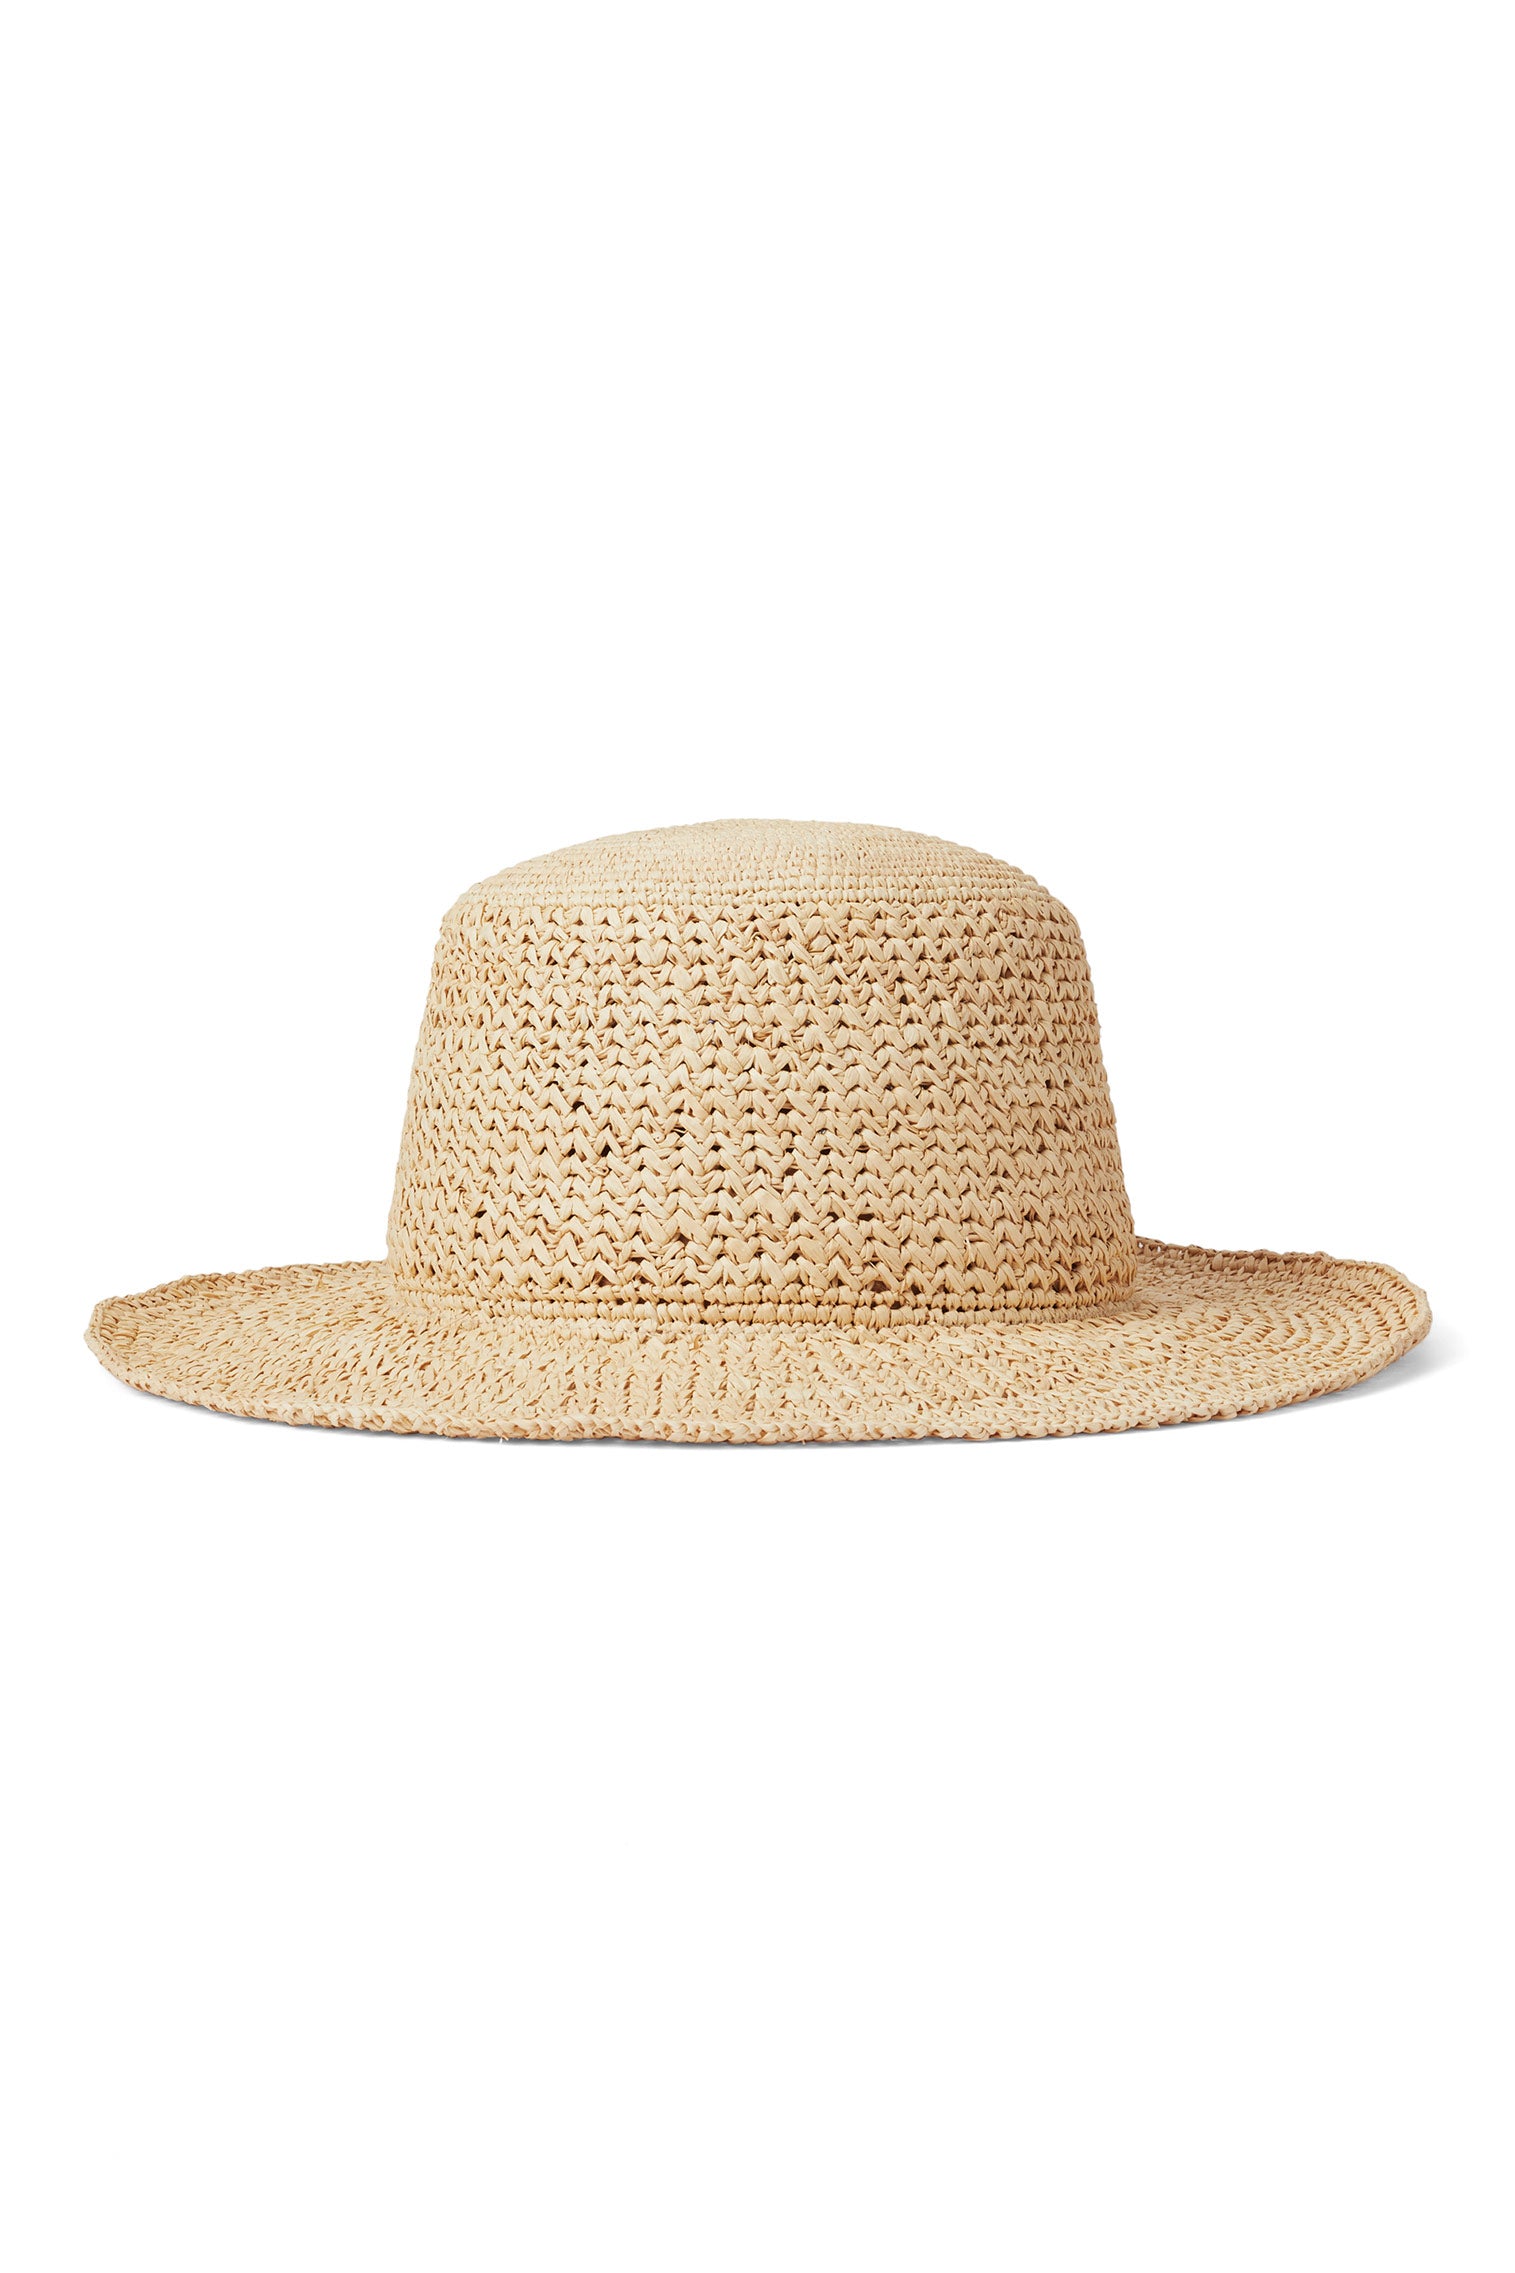 Camber Crochet Panama - Products - Lock & Co. Hatters London UK